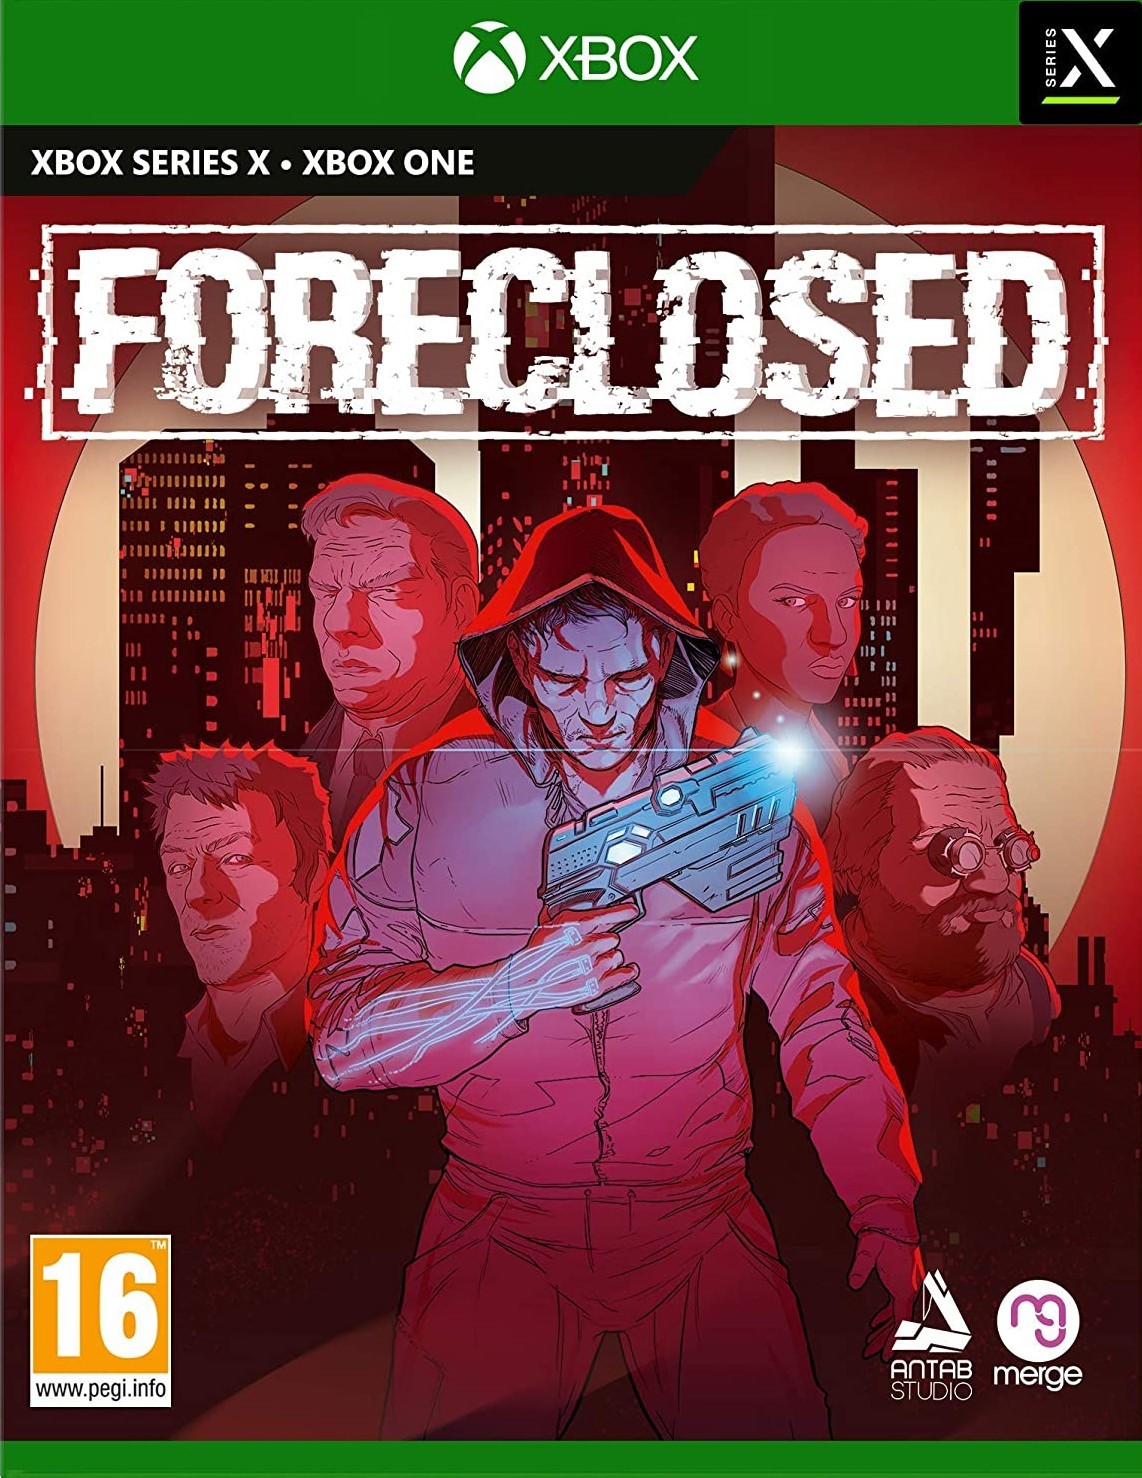 Merge Games Foreclosed